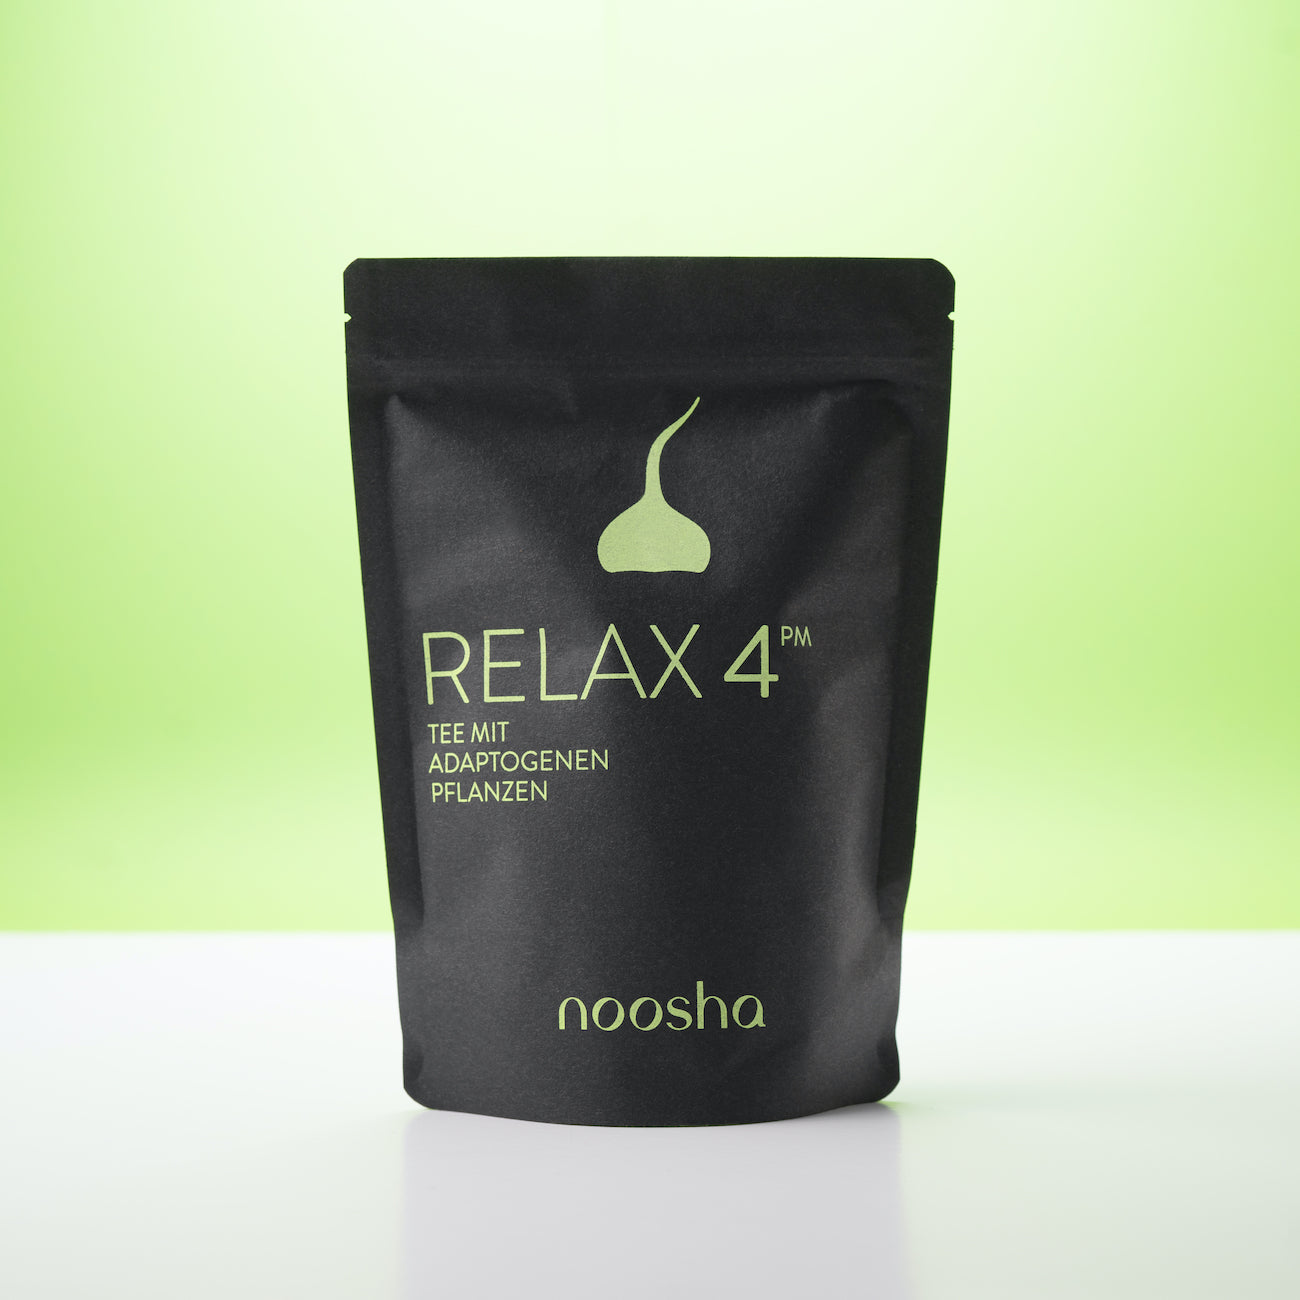 Packaging of RELAX 4PM tea made by noosha